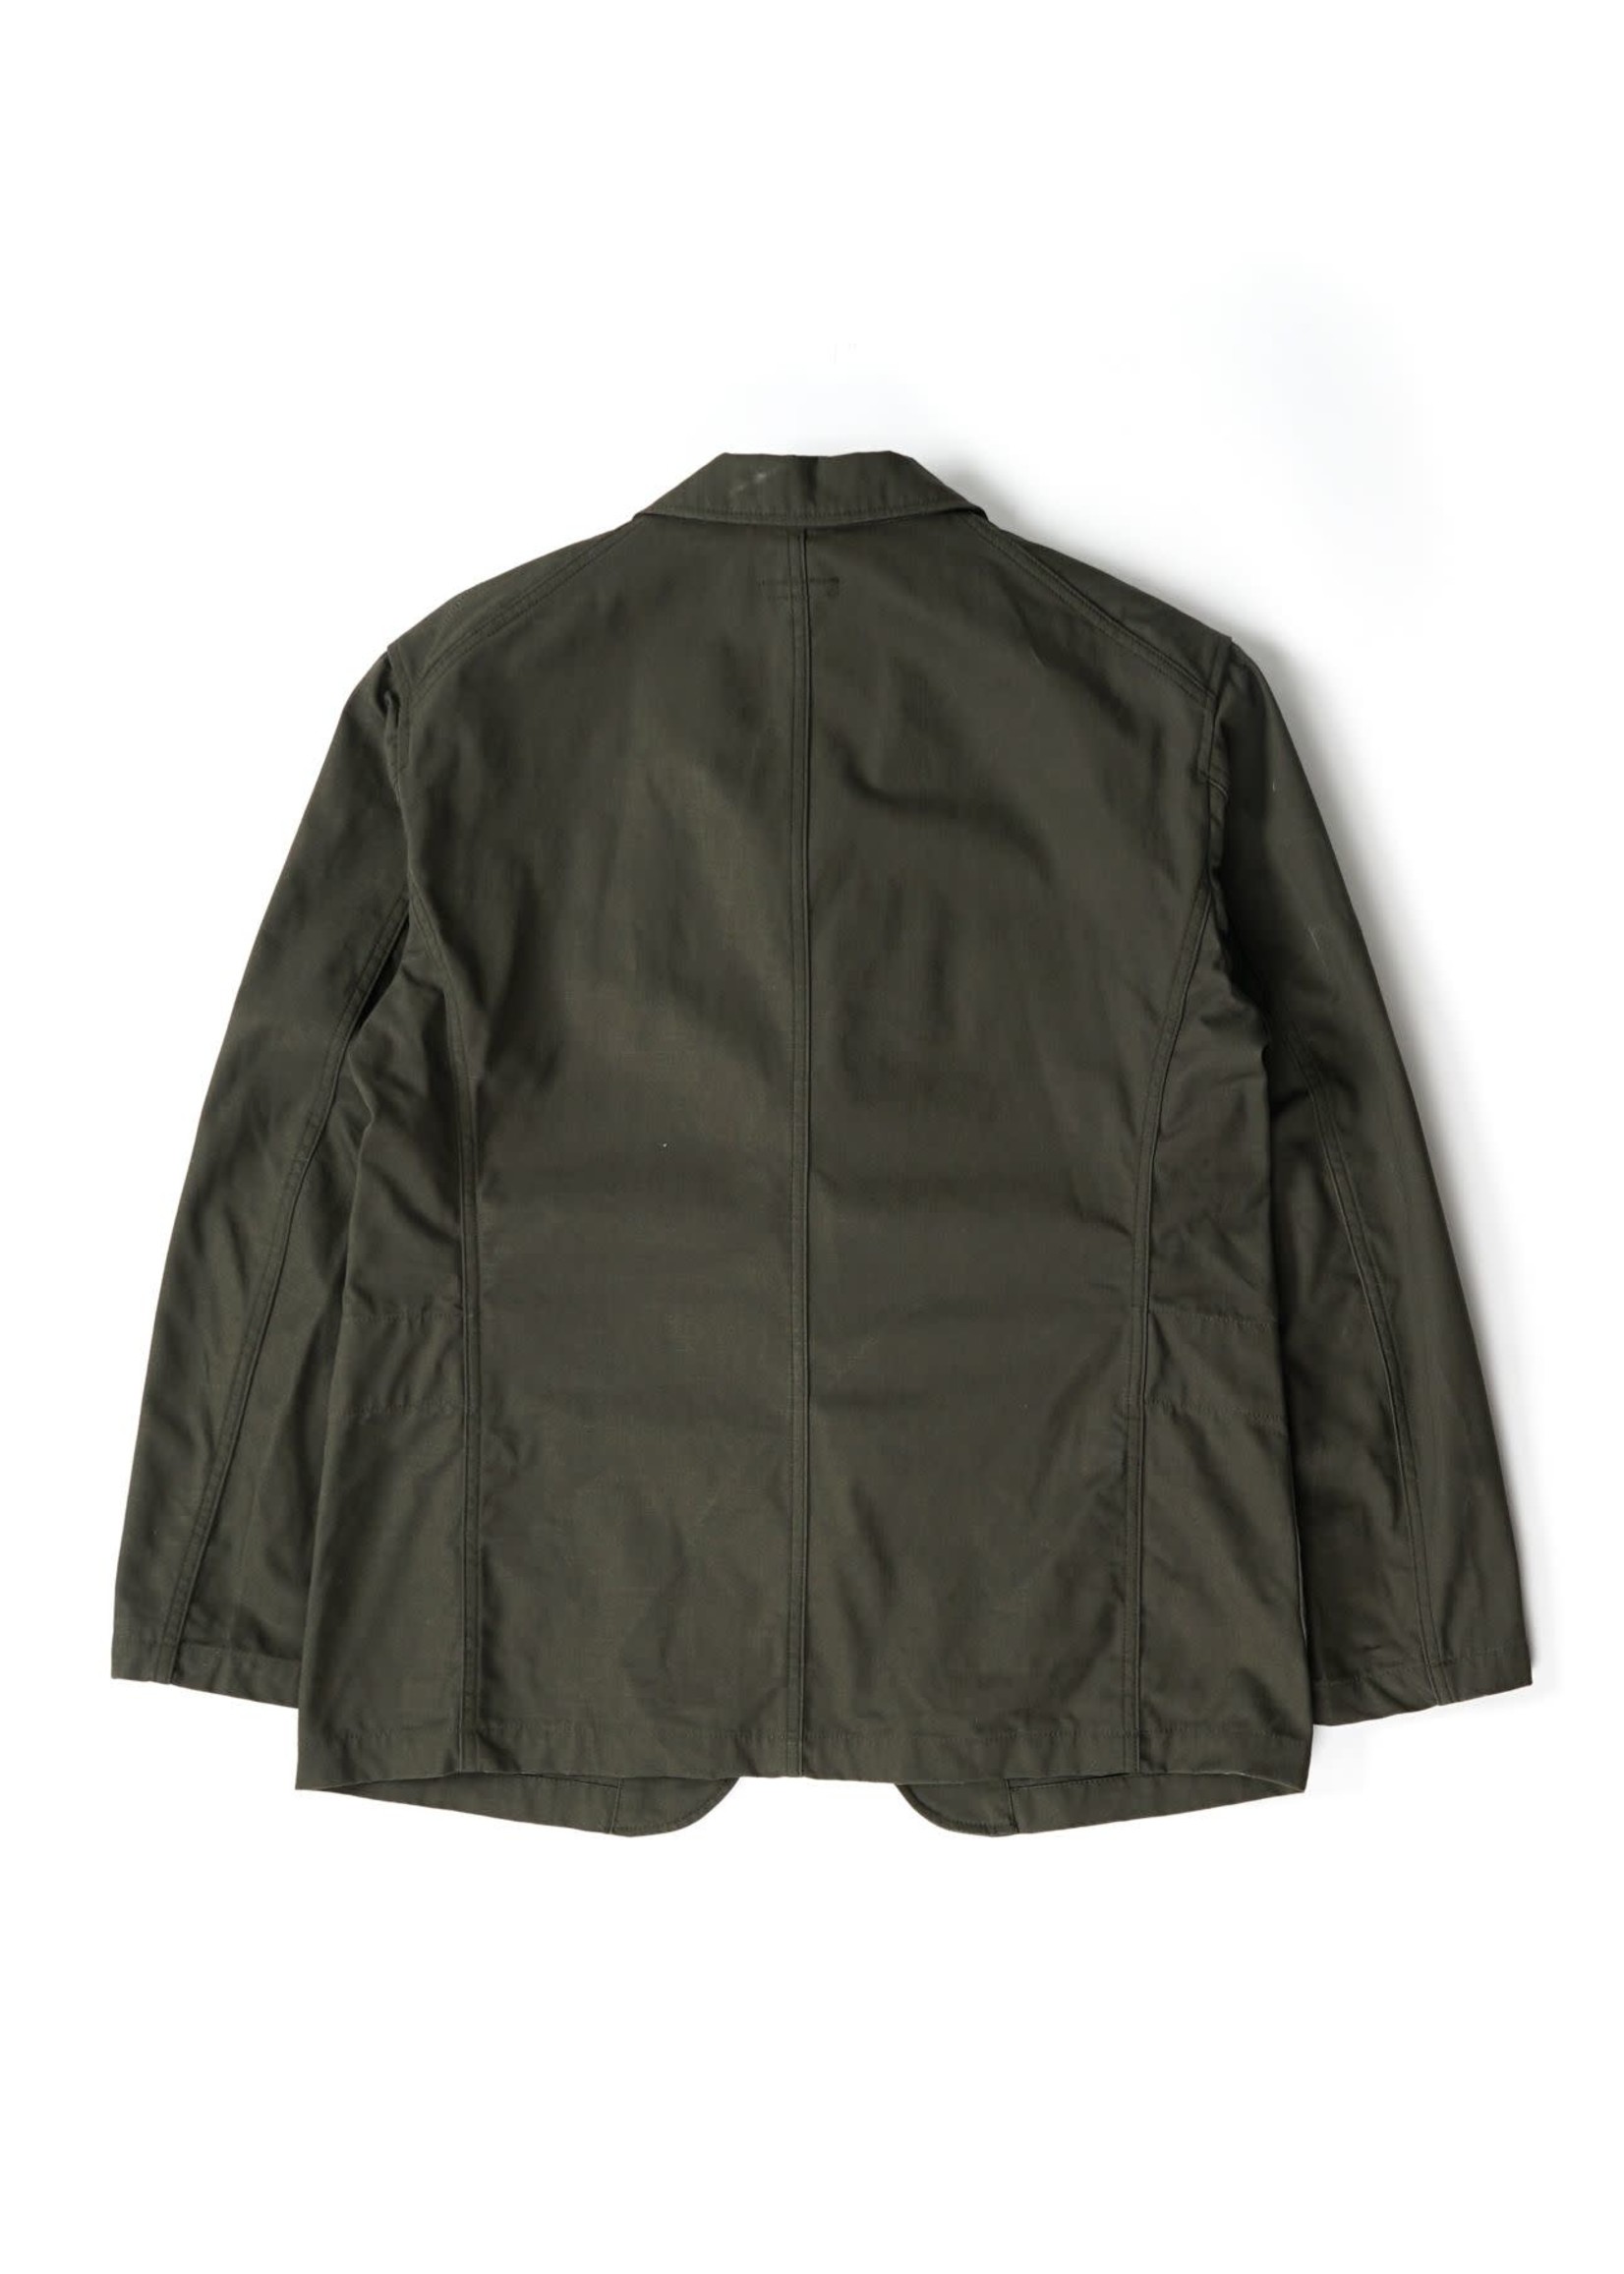 Engineered Garments Engineered Garments Bedford Jacket Olive Heavy Weight  Cotton Ripstop